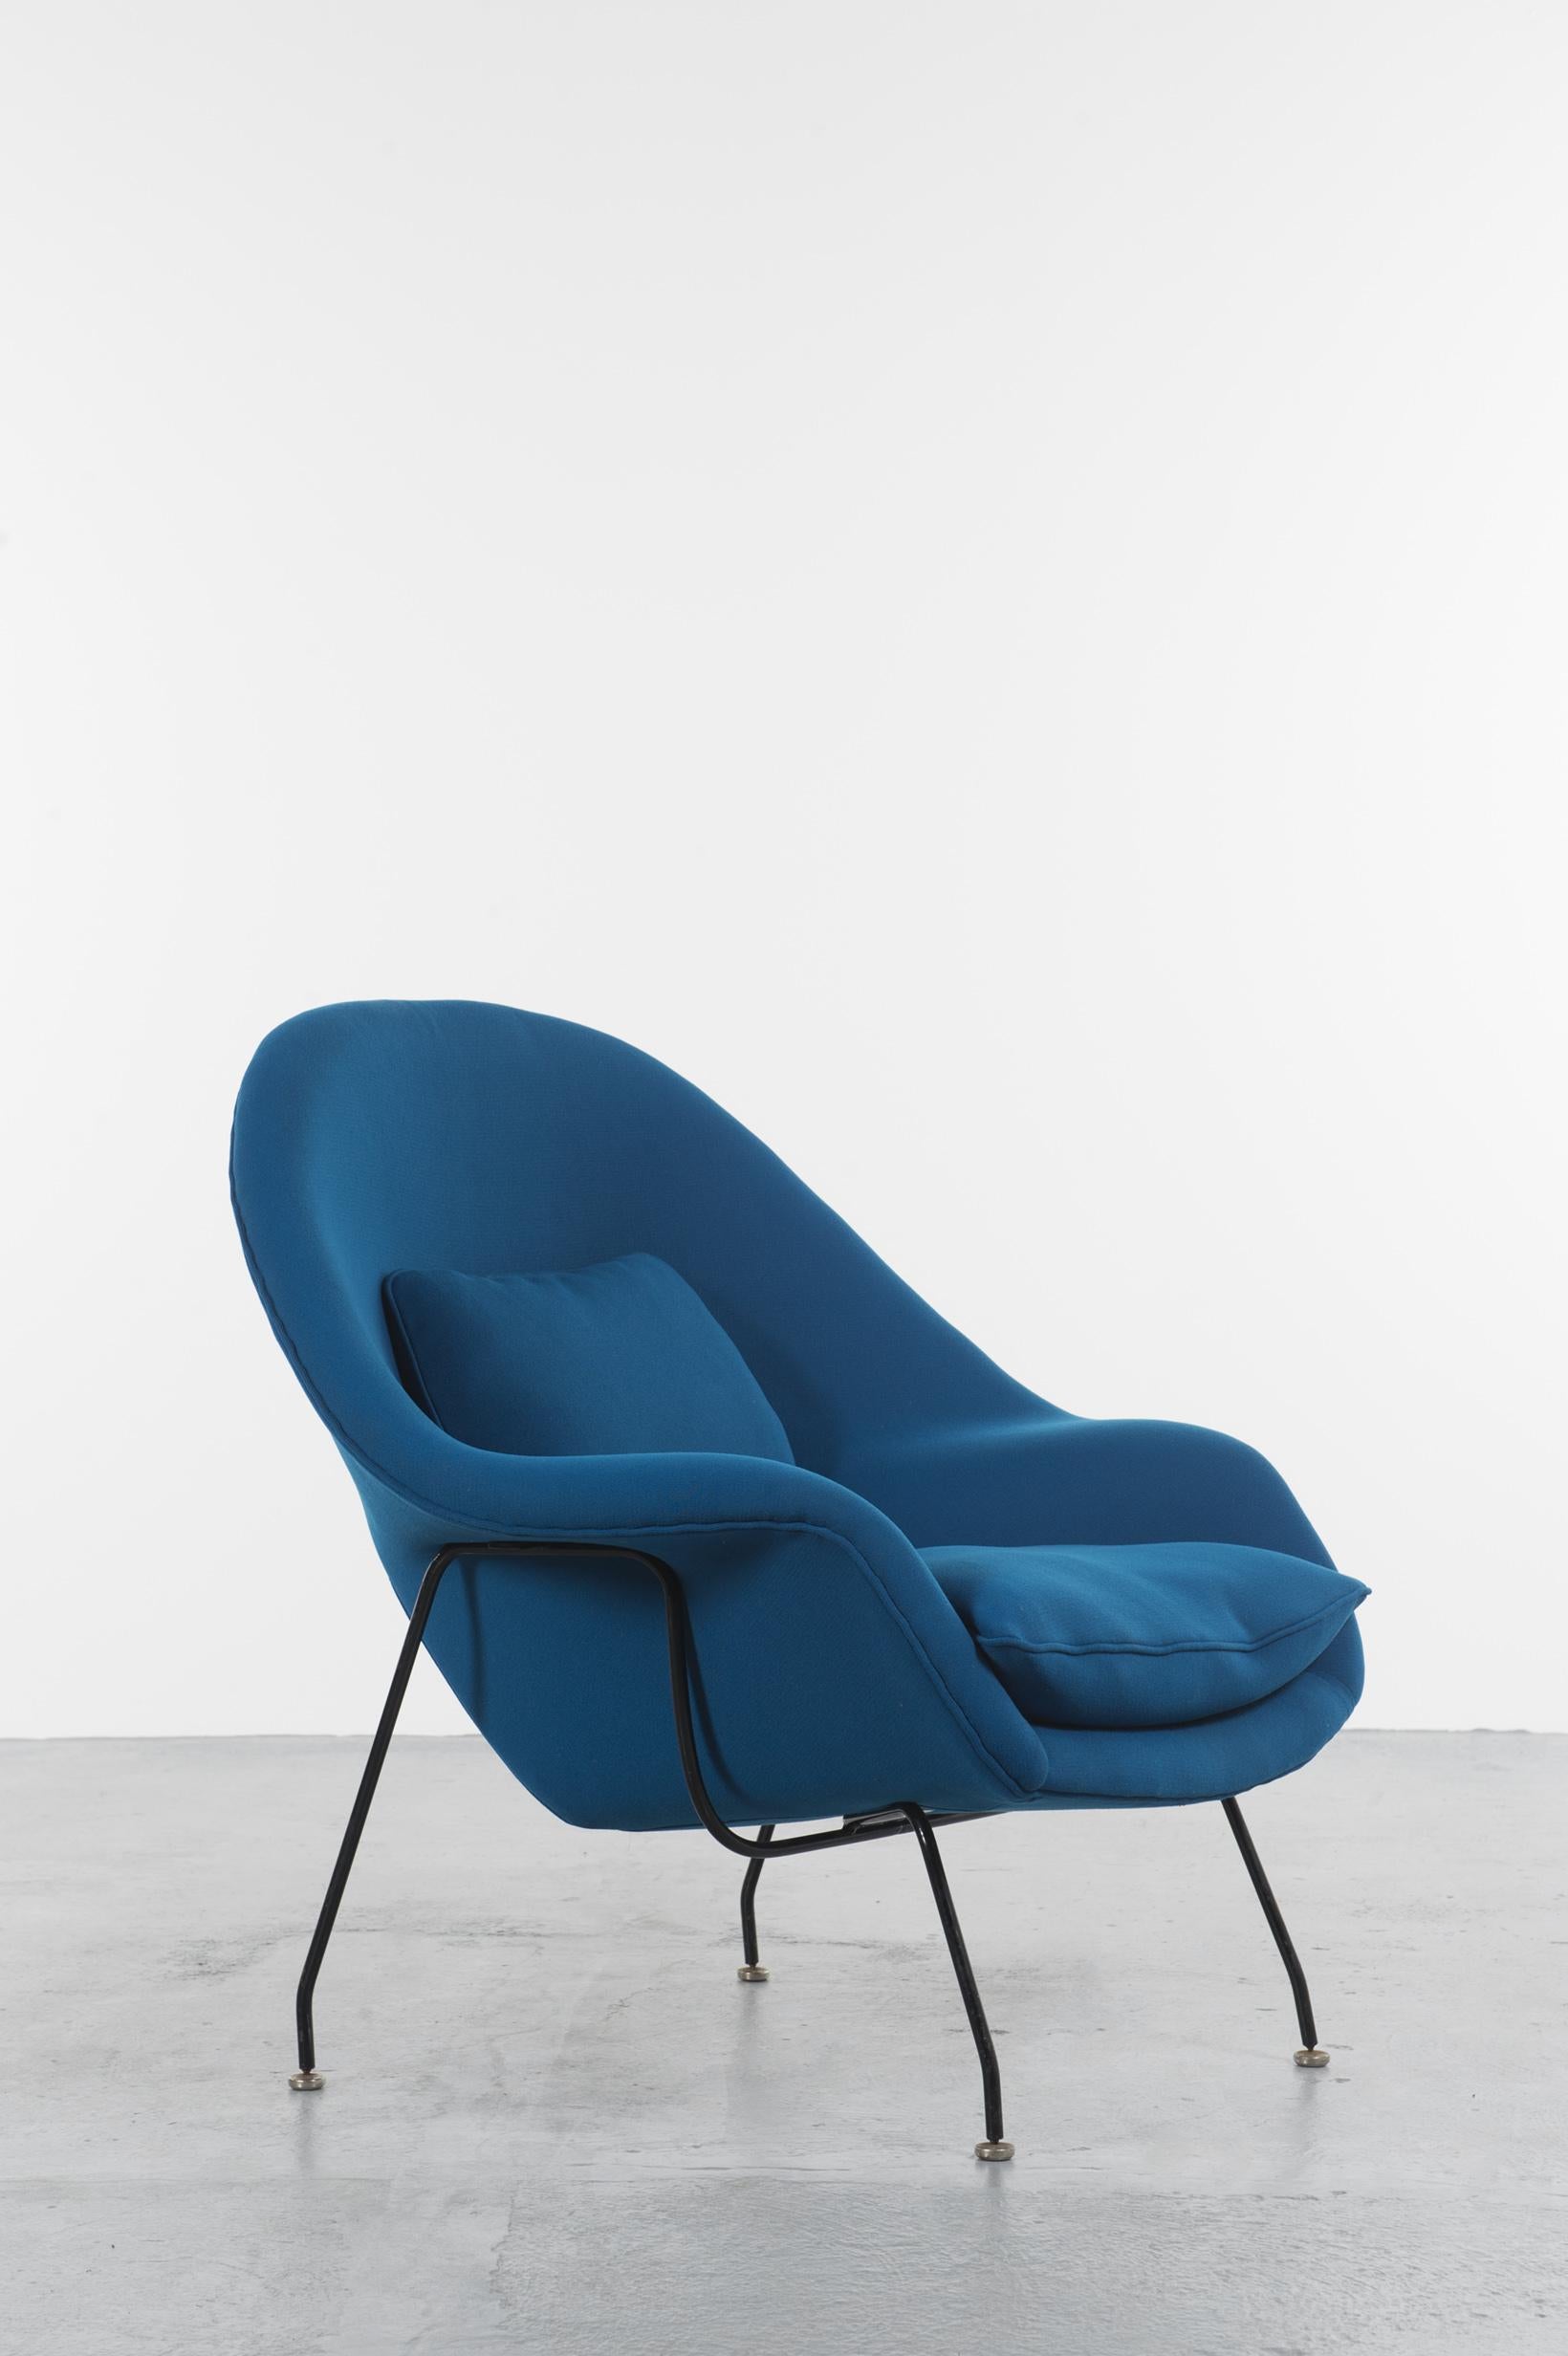 Lacquered Womb Chair and ottoman by Eero Saarinen Produced by Knoll First Edition, Europe